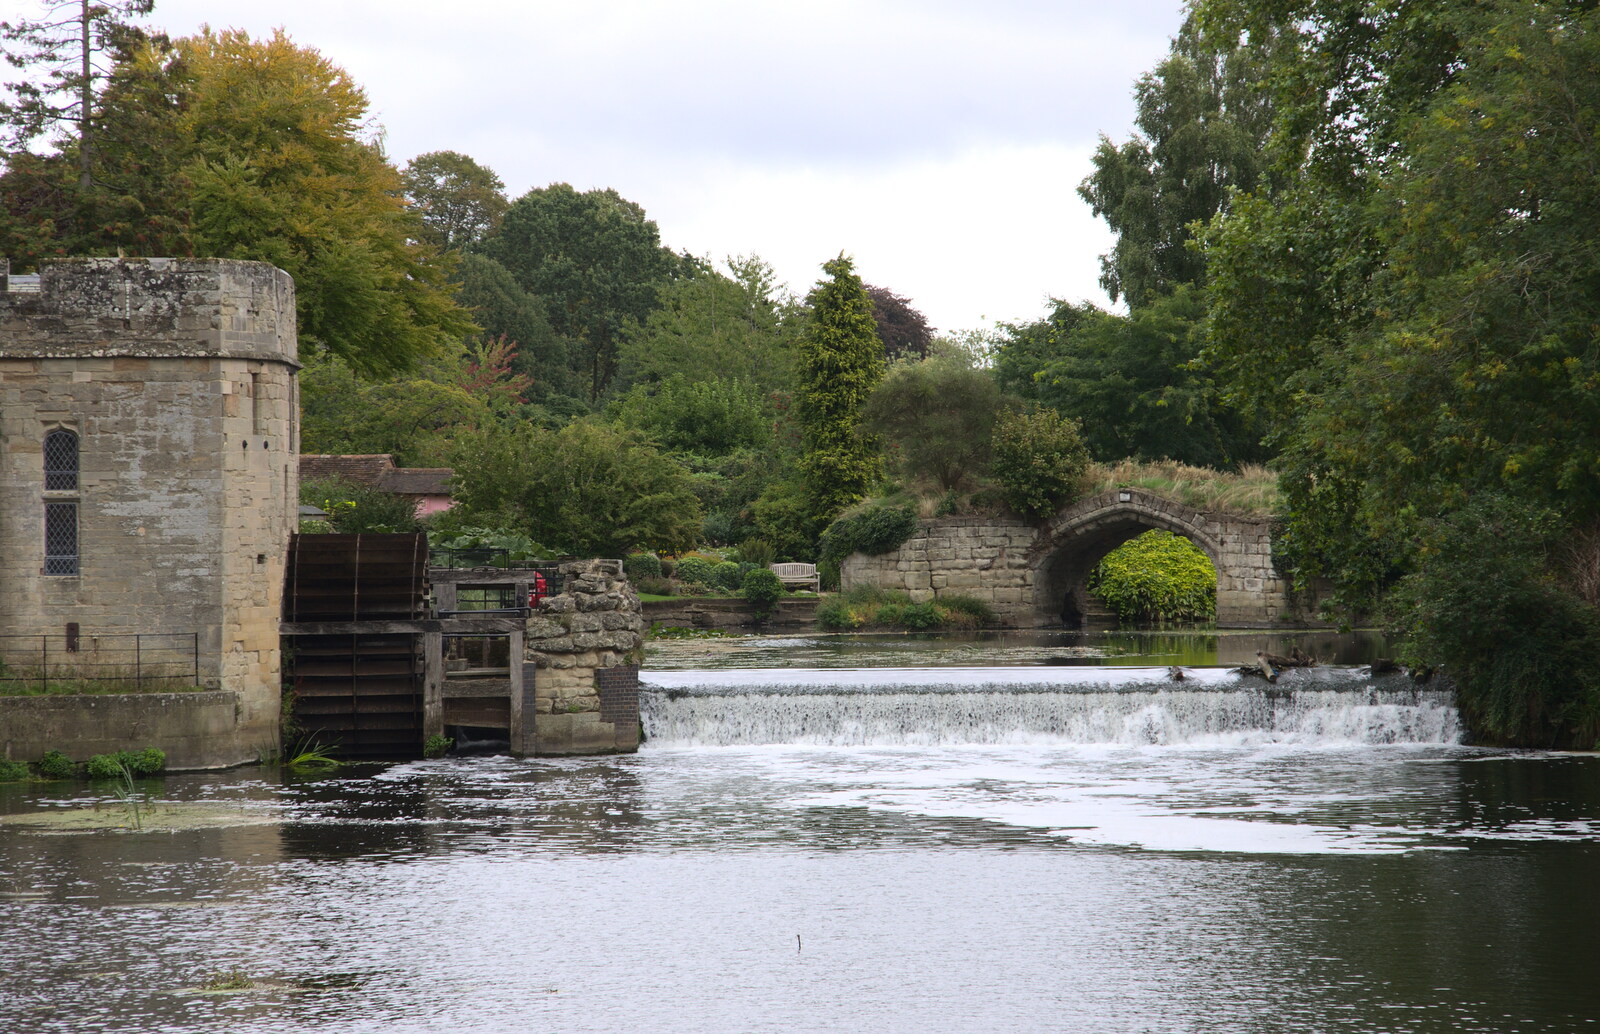 A weir from A Day at Warwick Castle, Warwickshire - 8th September 2018